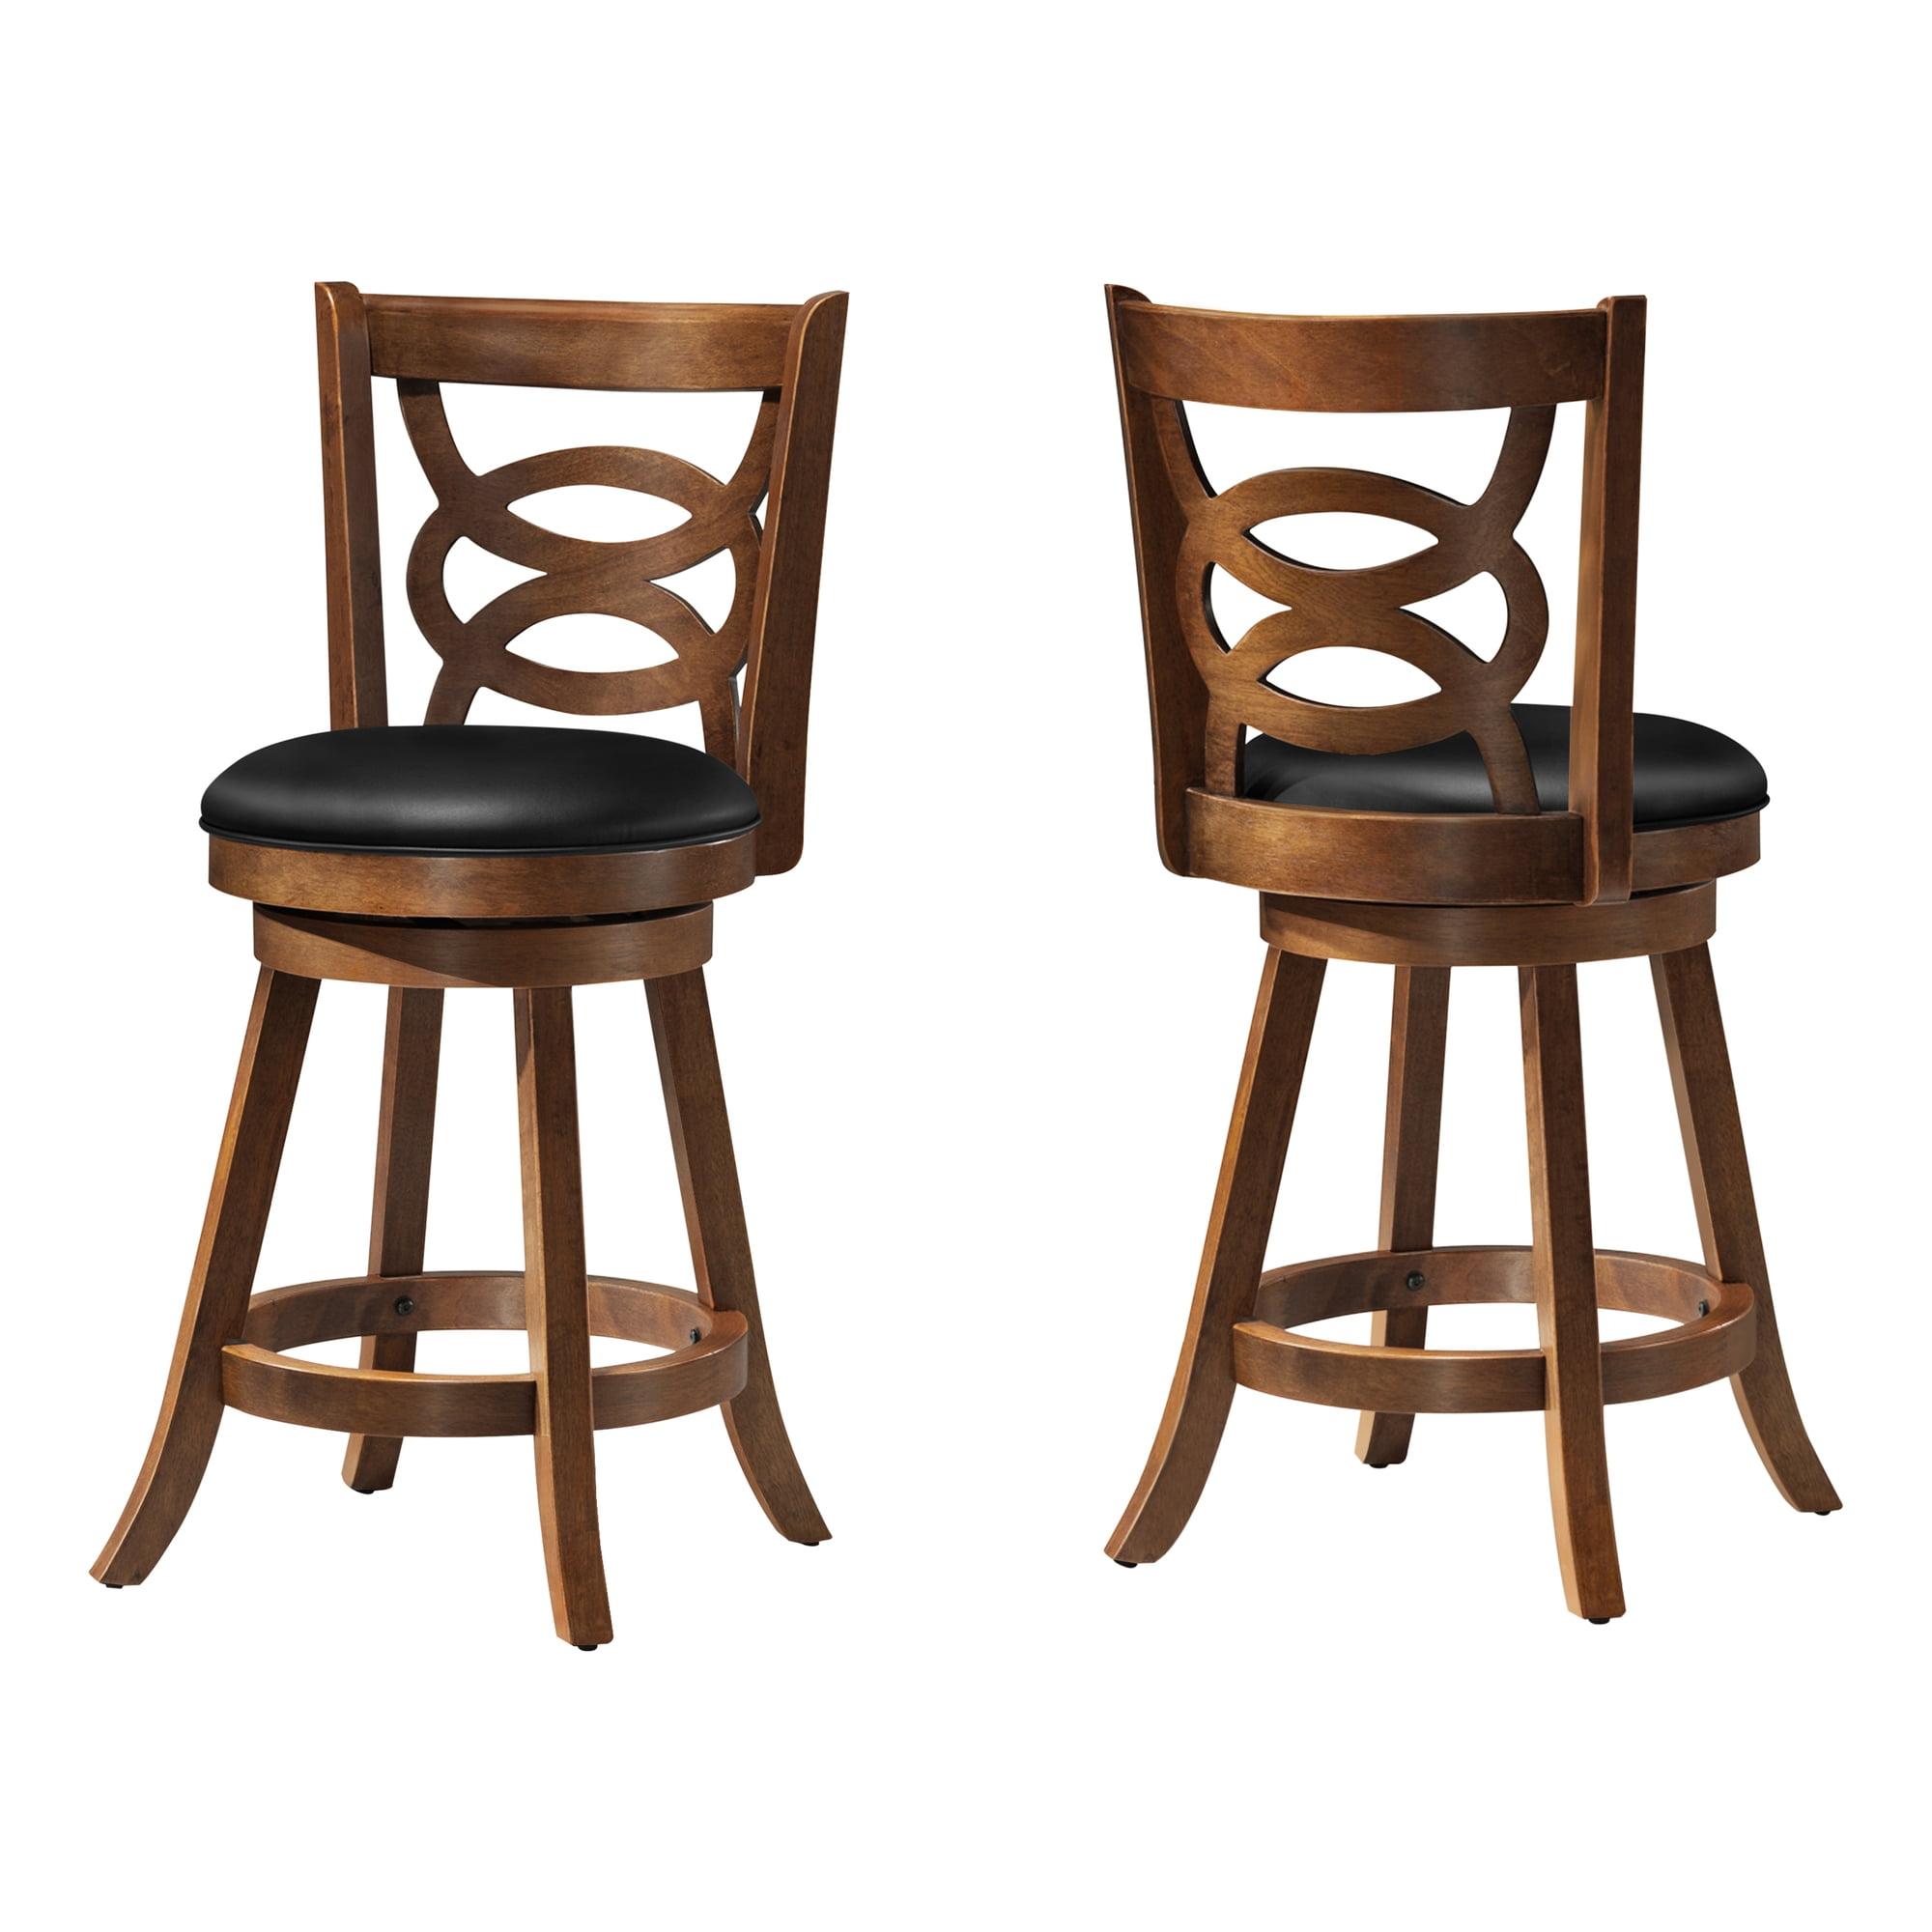 Transitional Oak and Black Leather Swivel Counter Stool, Set of 2